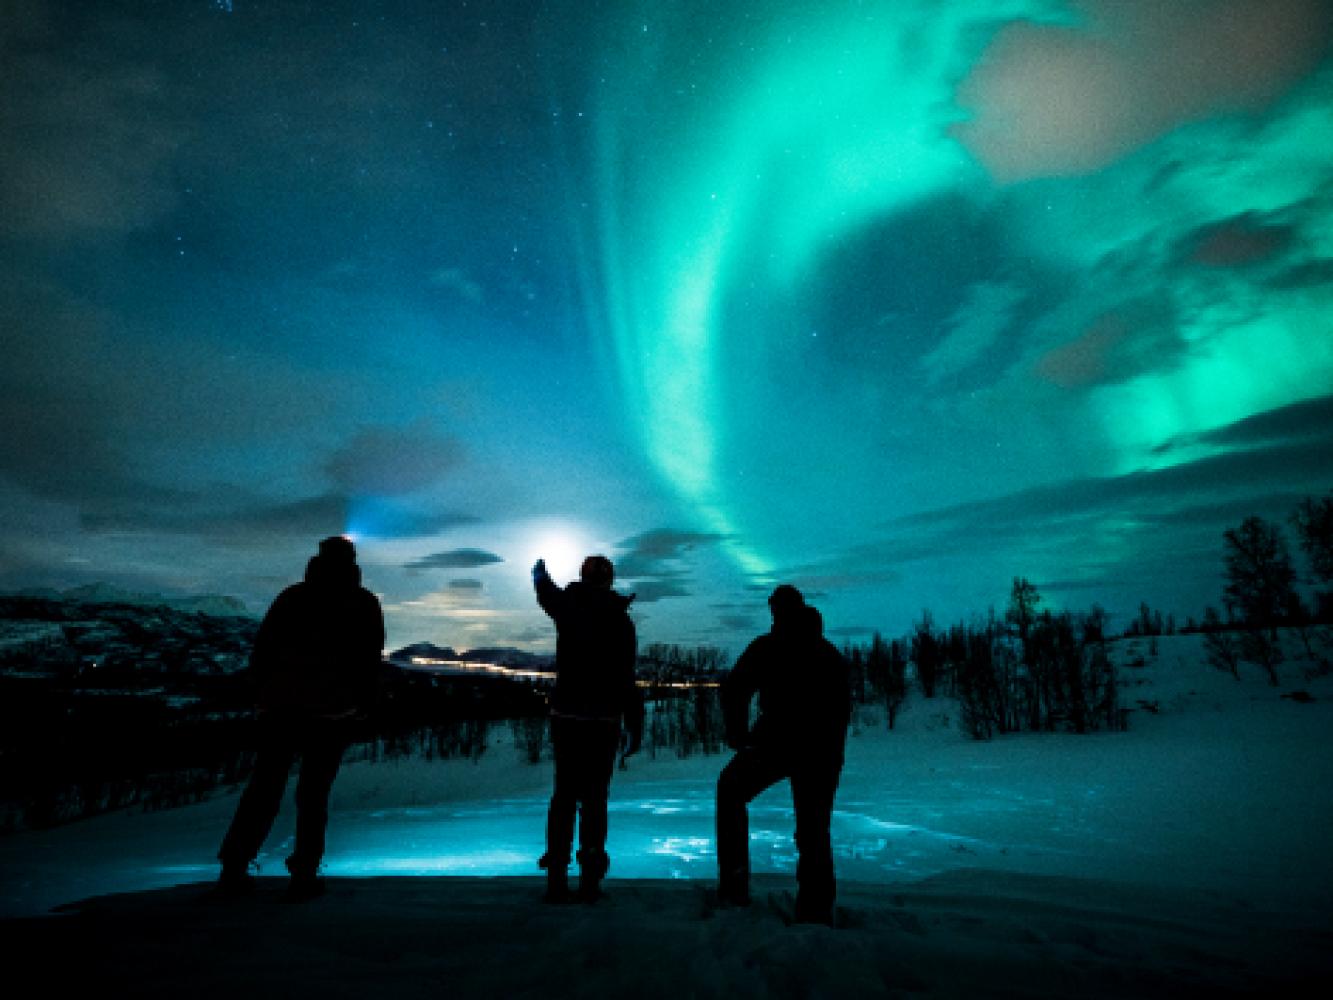 Watching the northern lights in Arctic winter landscape